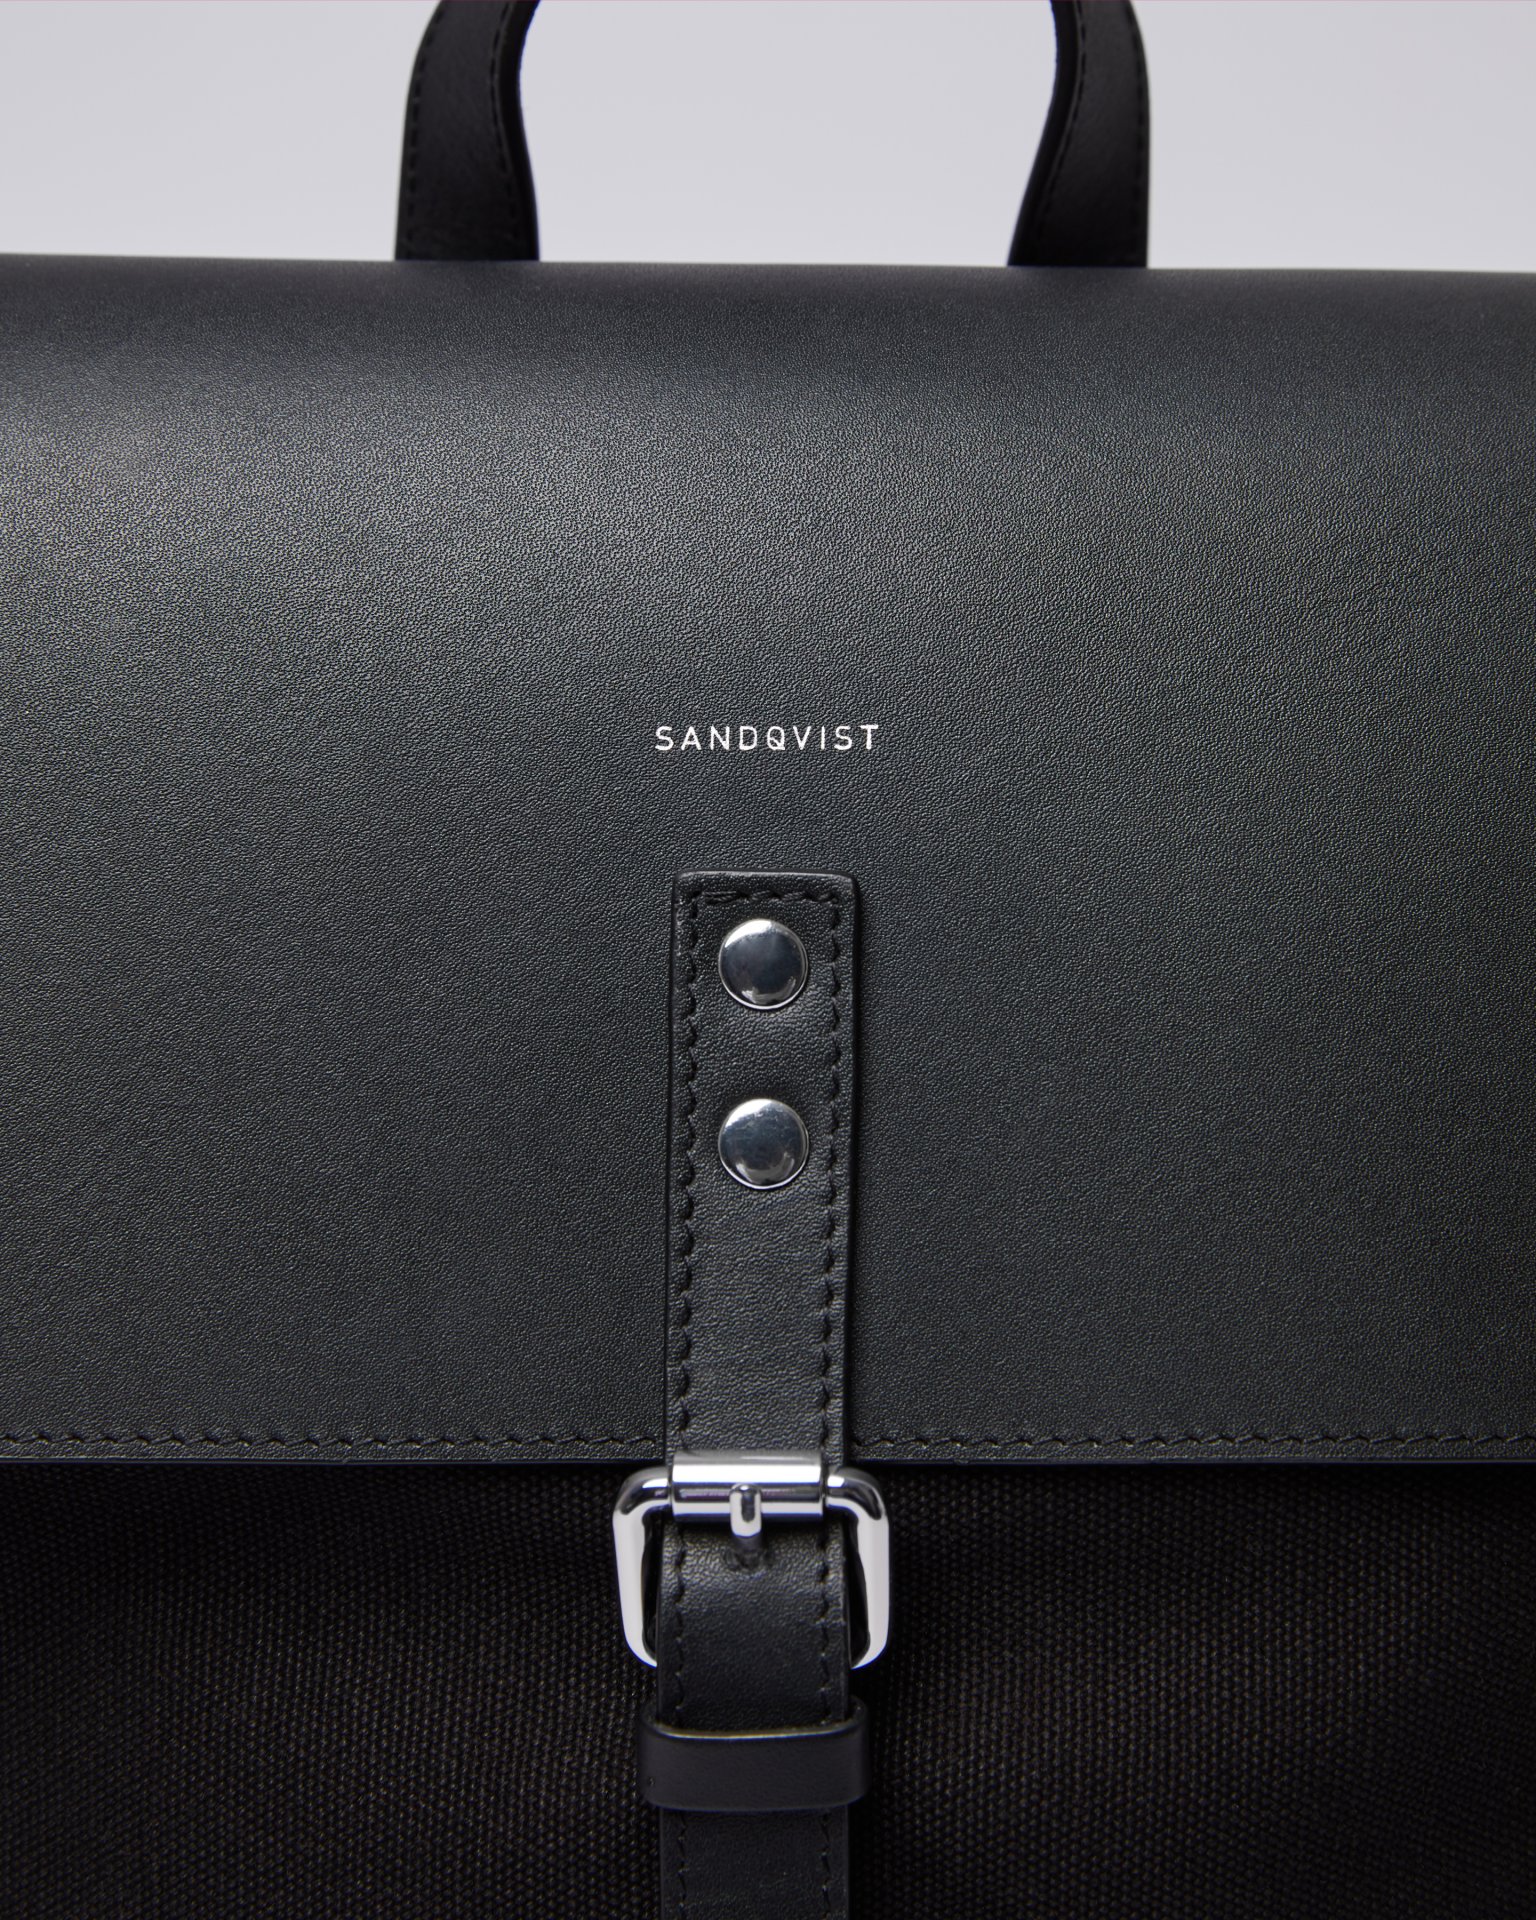 Sandqvist – “Sustainable bags made to last“